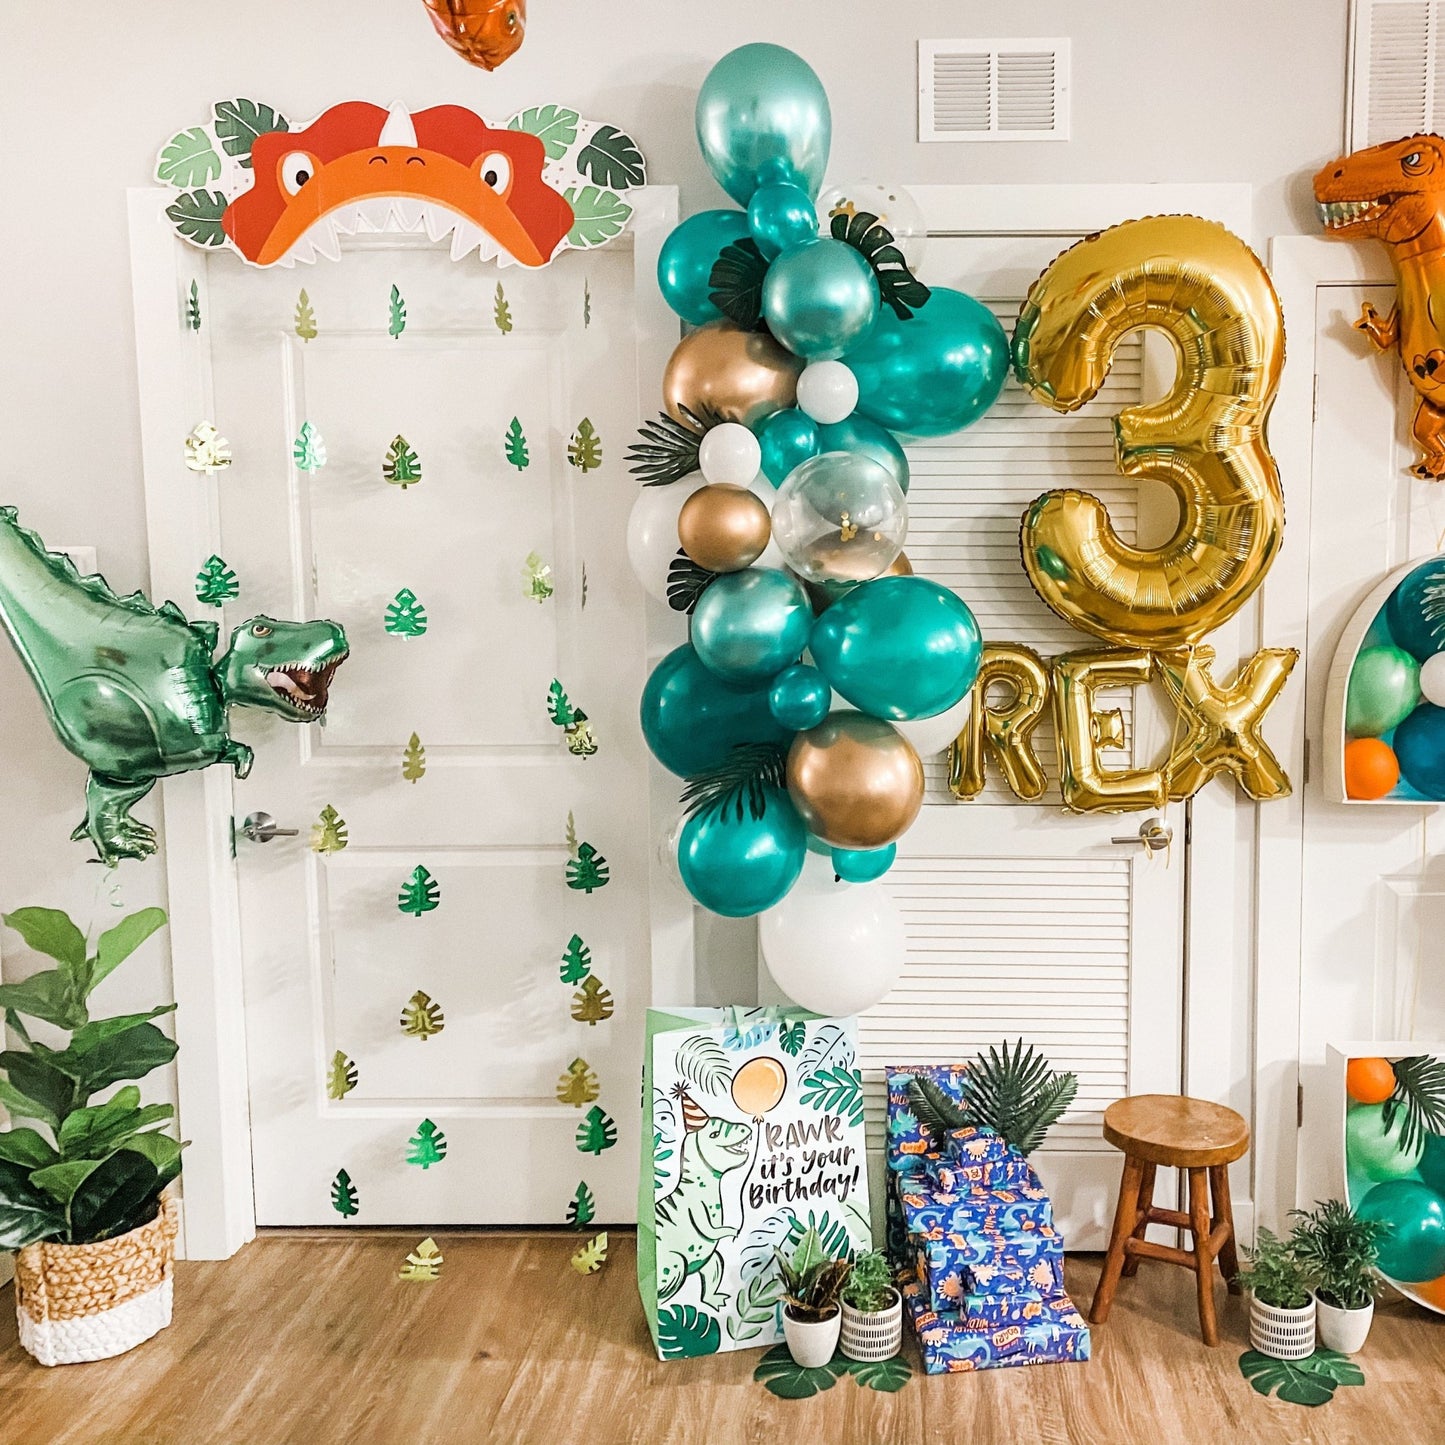 Premium Chrome Green Latex Balloon Packs (5" and 11”) - Ellie's Party Supply